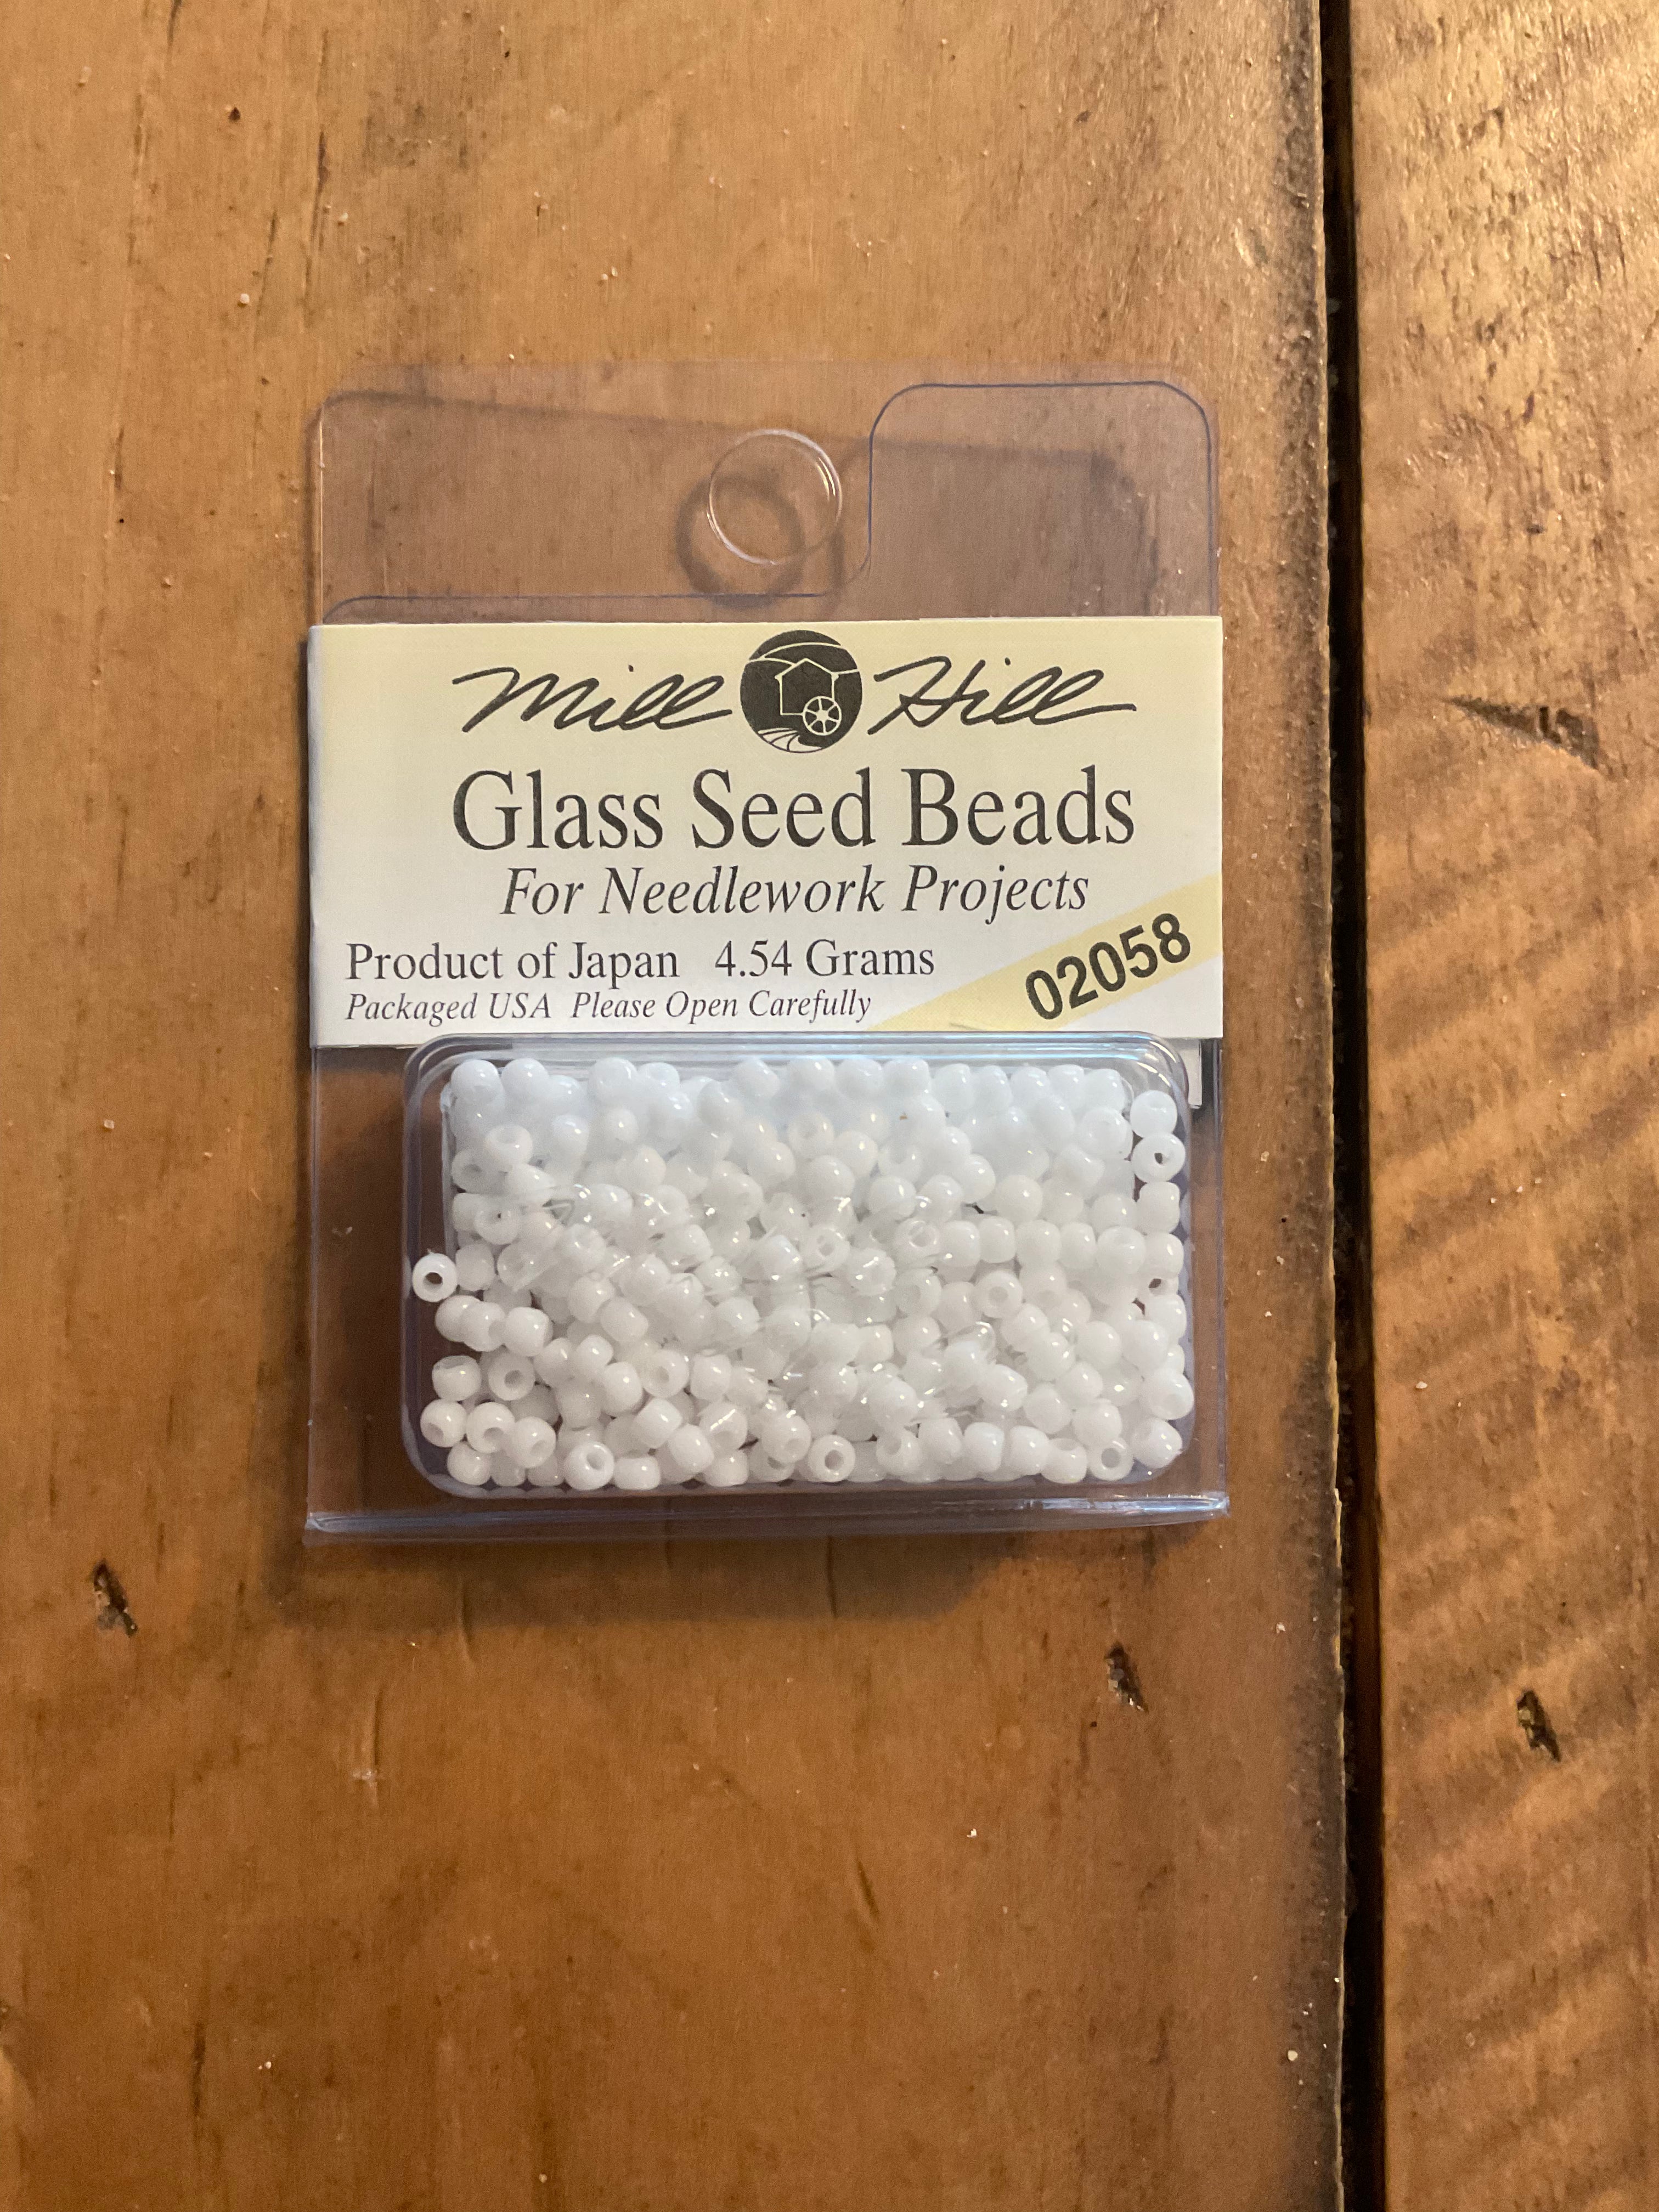 Mill hill beads 02058